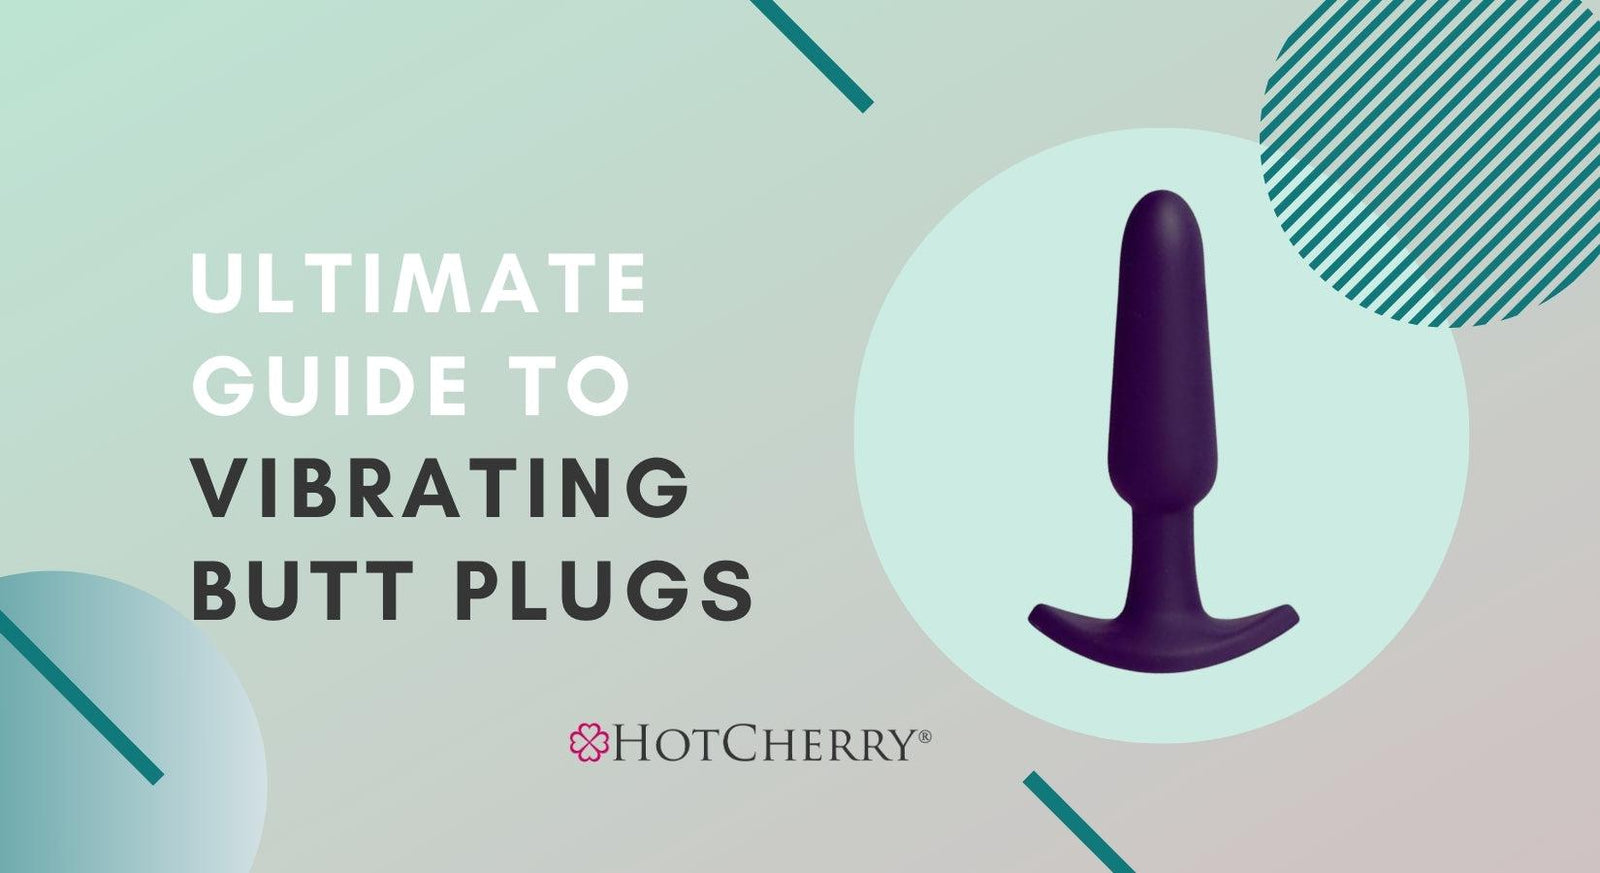 Ultimate Guide Vibrating Butt Plugs